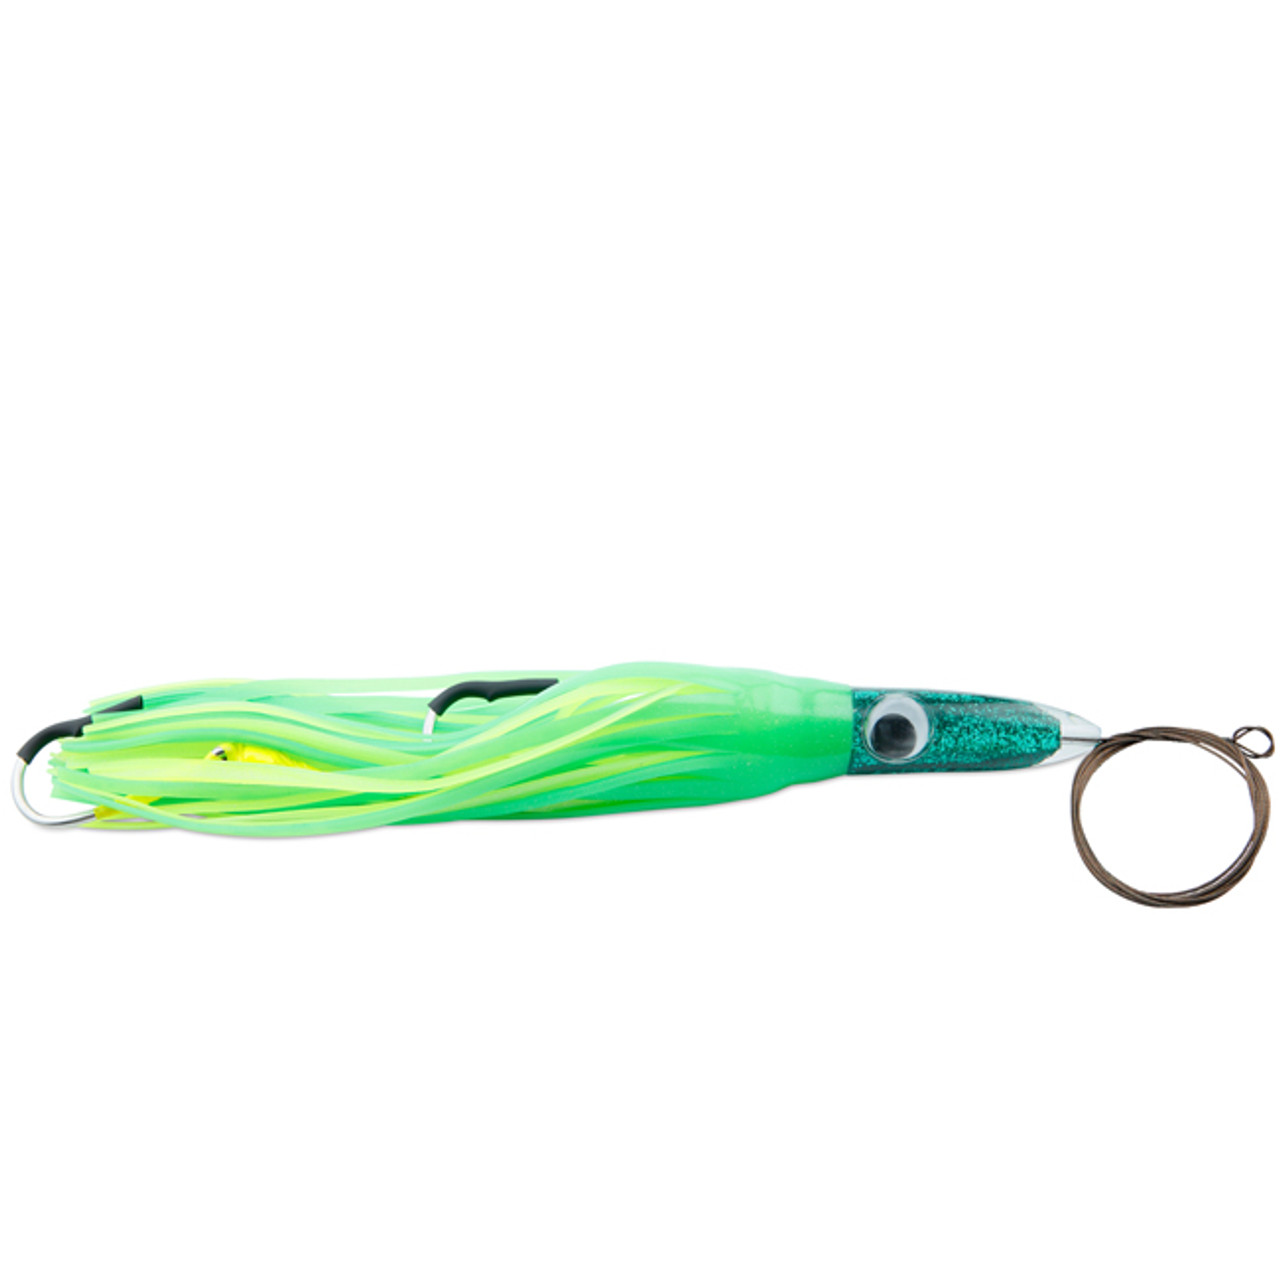 C&H Lures - Wahoo Whacker XL Lure - Rigged & Ready Cable - Green/Yellow Skirt 